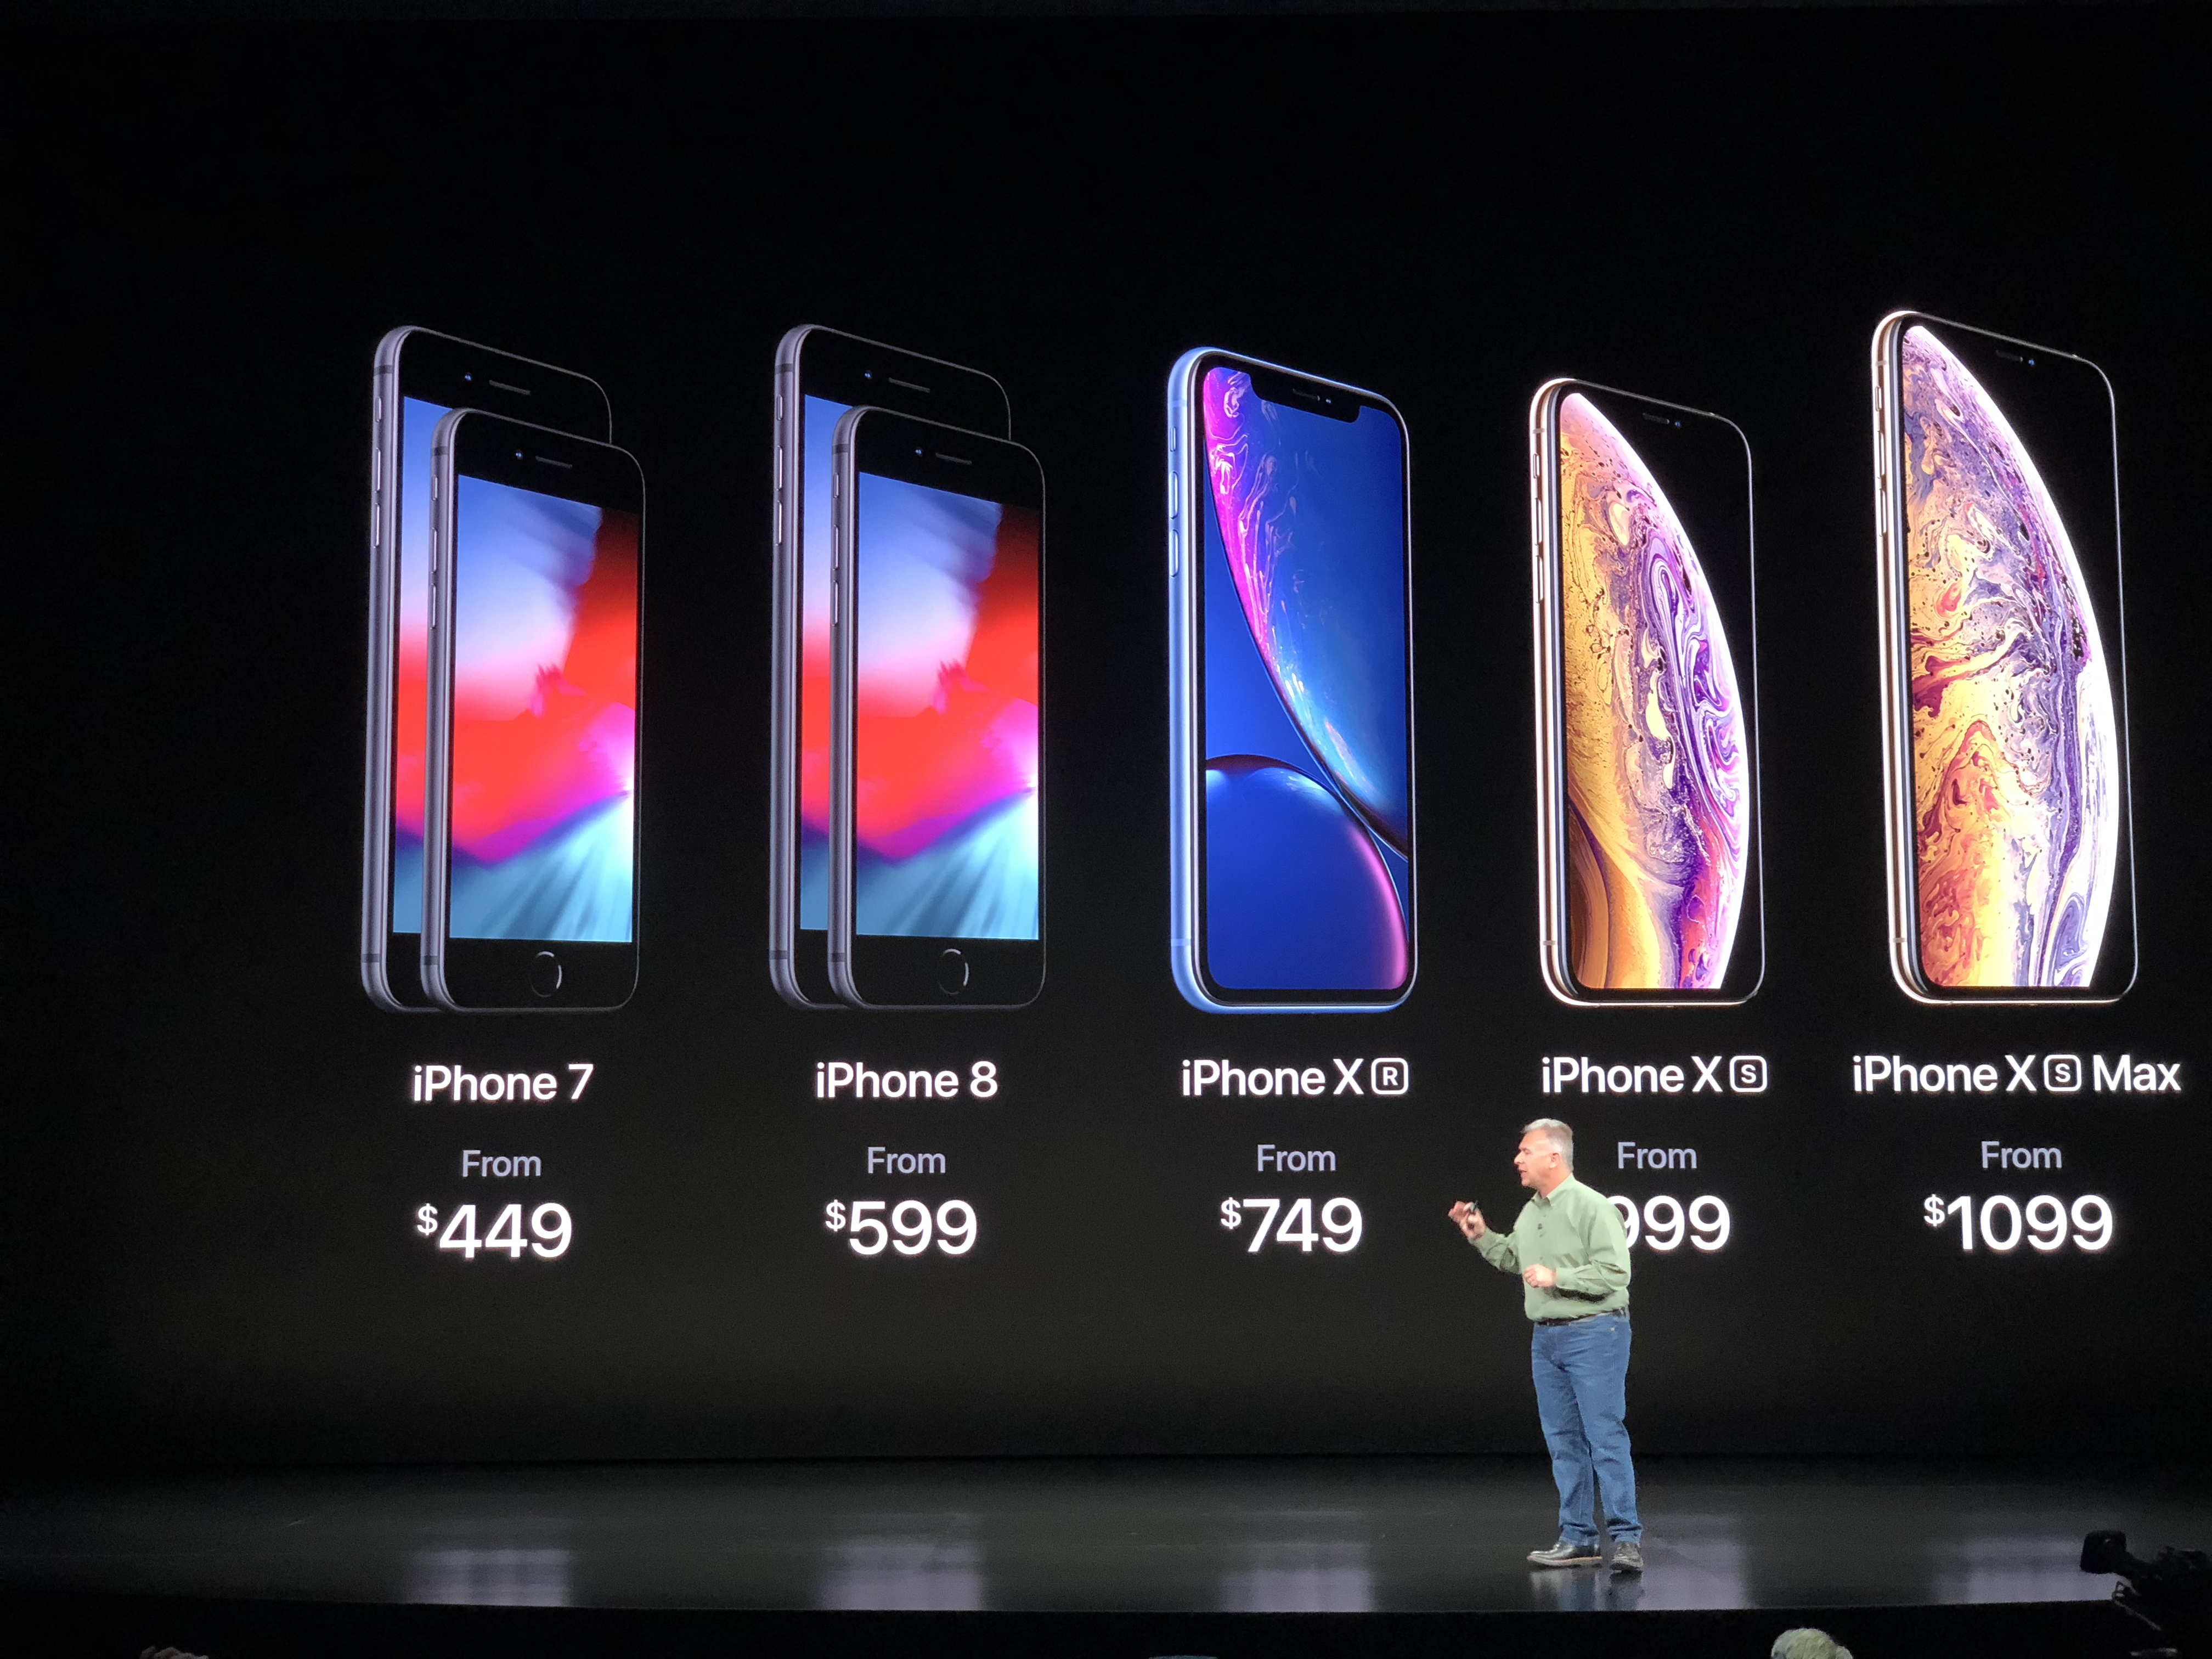 iphones in order from oldest to newest